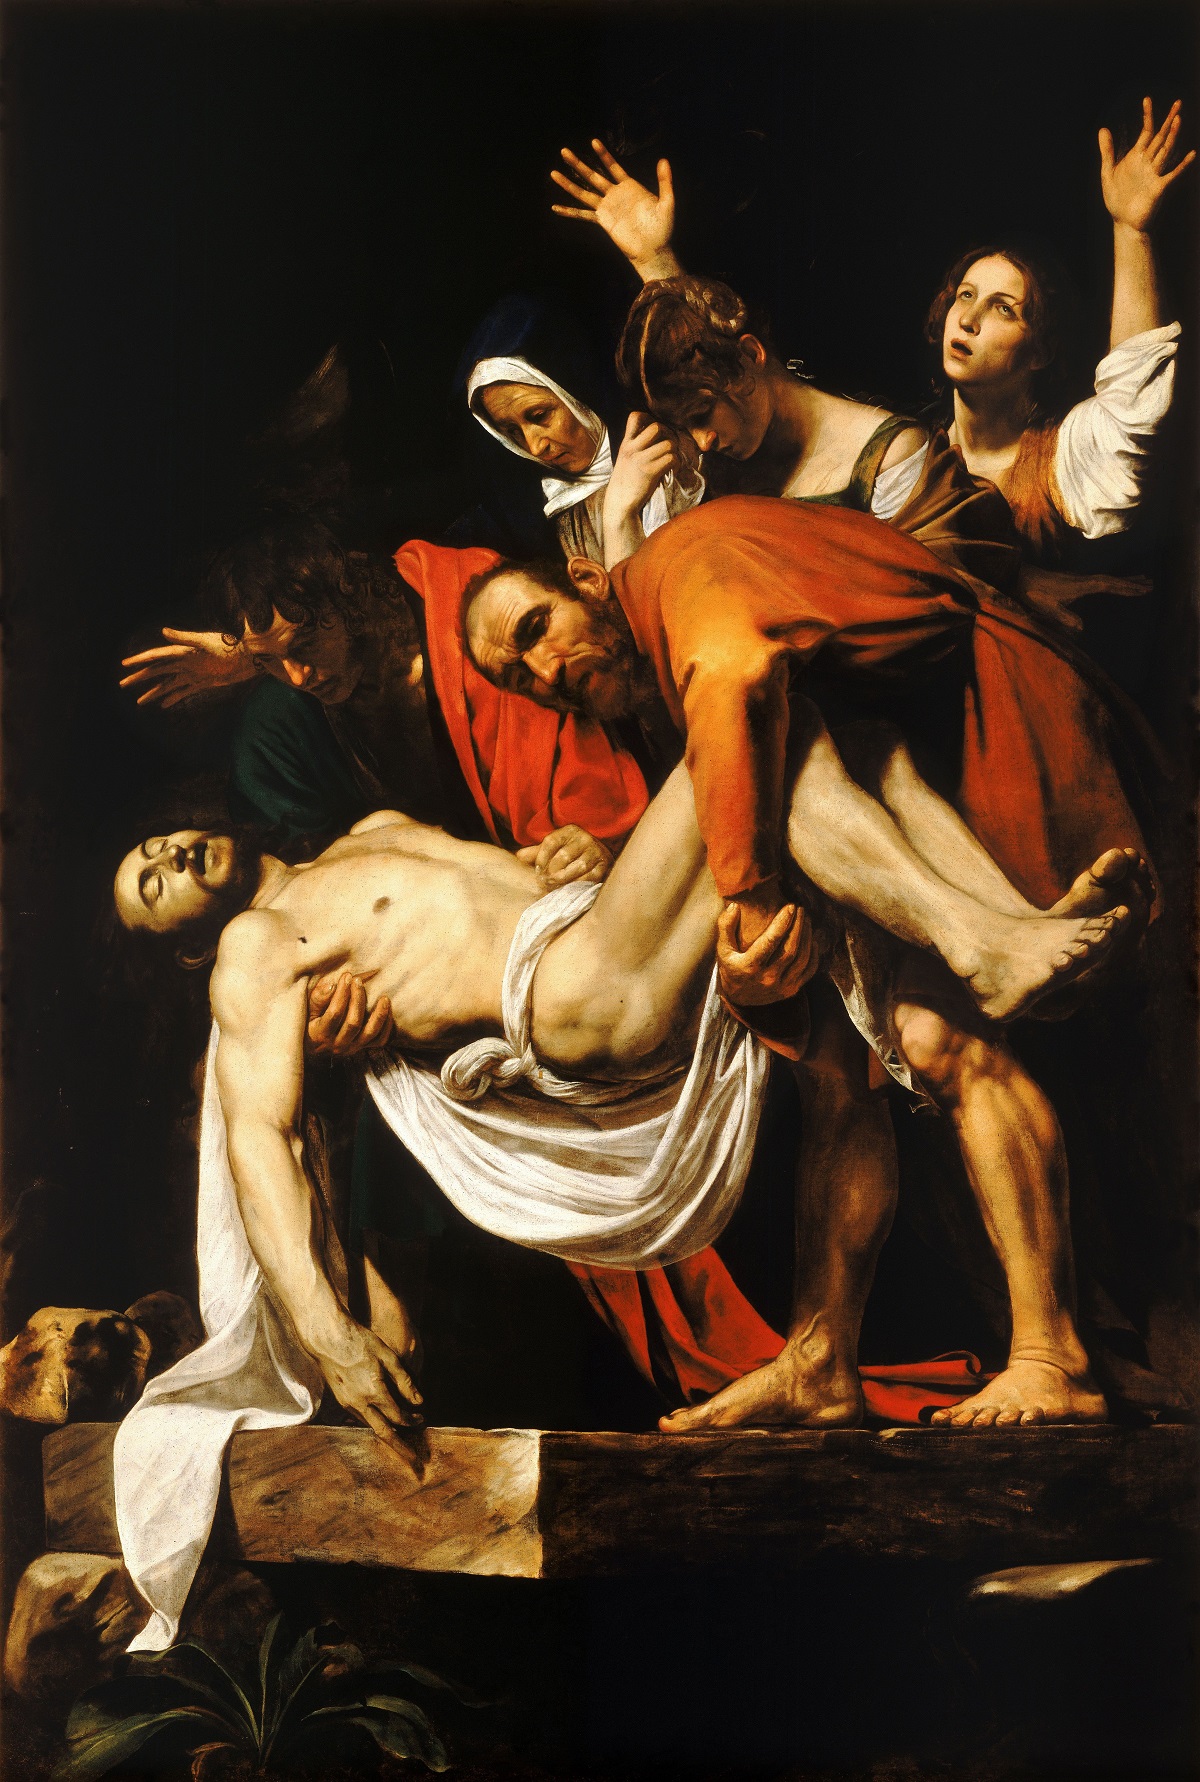 Caravaggio's dark style is on full display in The Entombment of Christ.